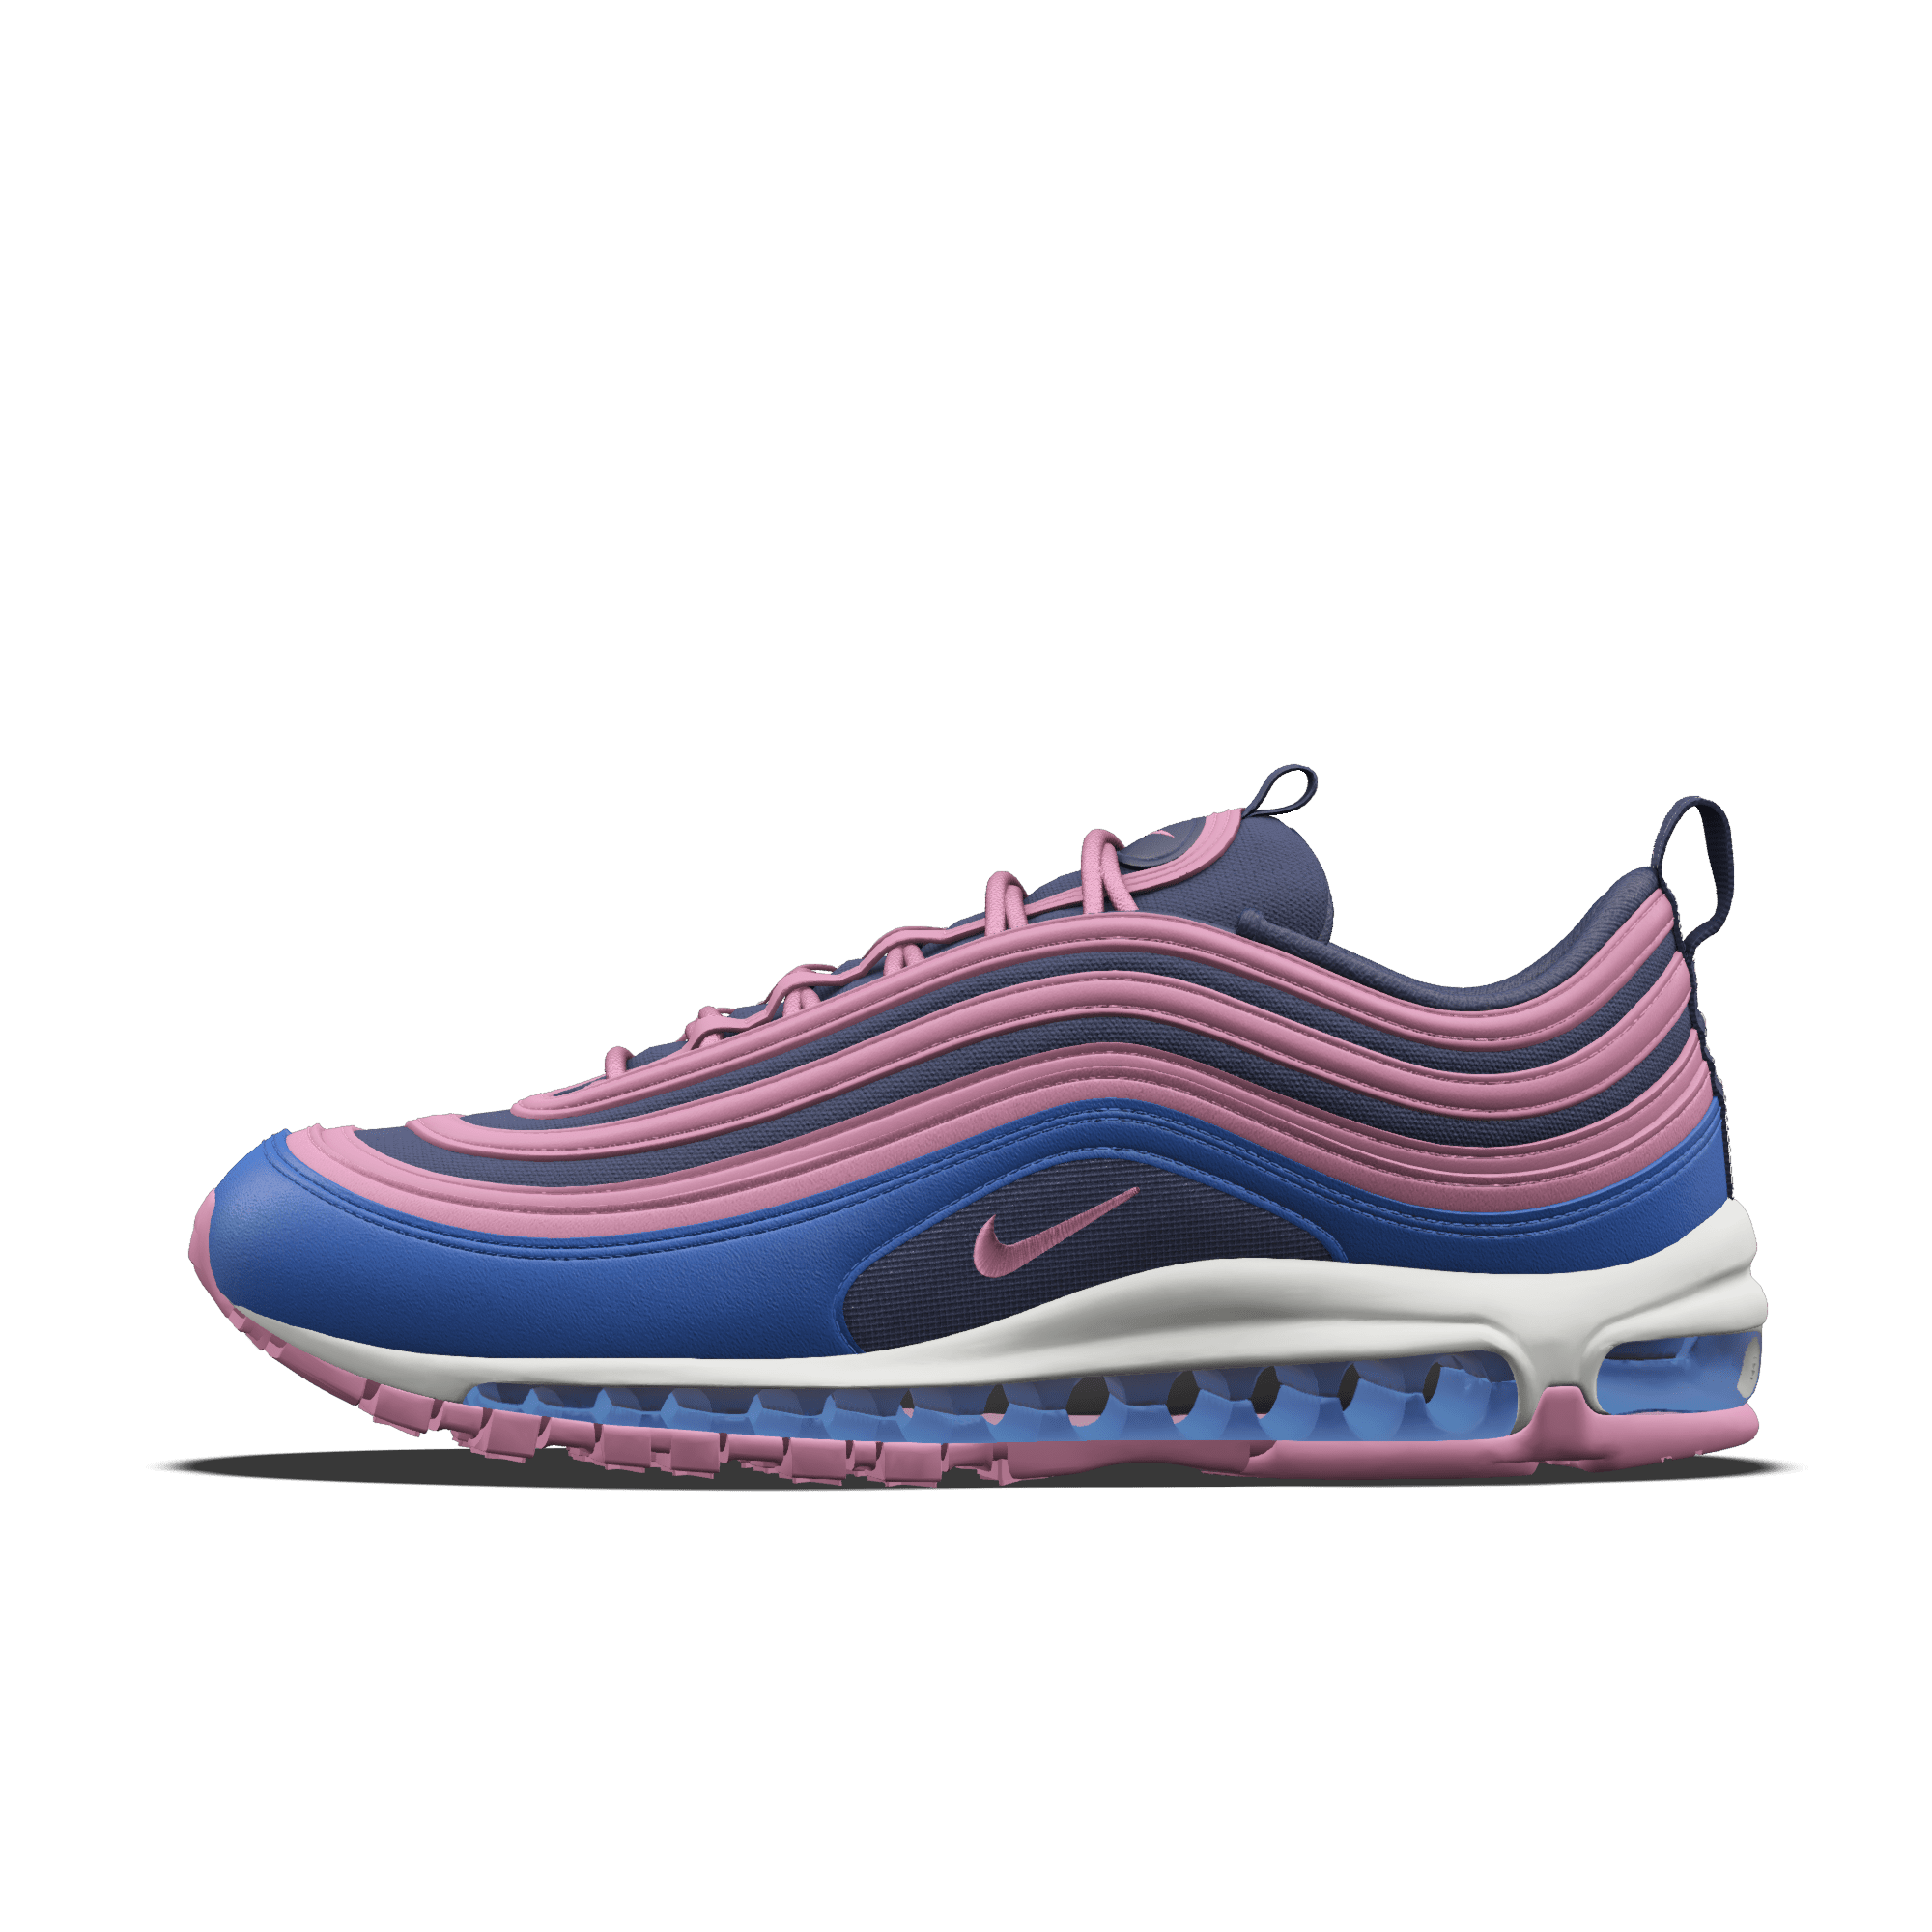 Chaussure personnalisable Nike Air Max 97 By You pour femme - Rose